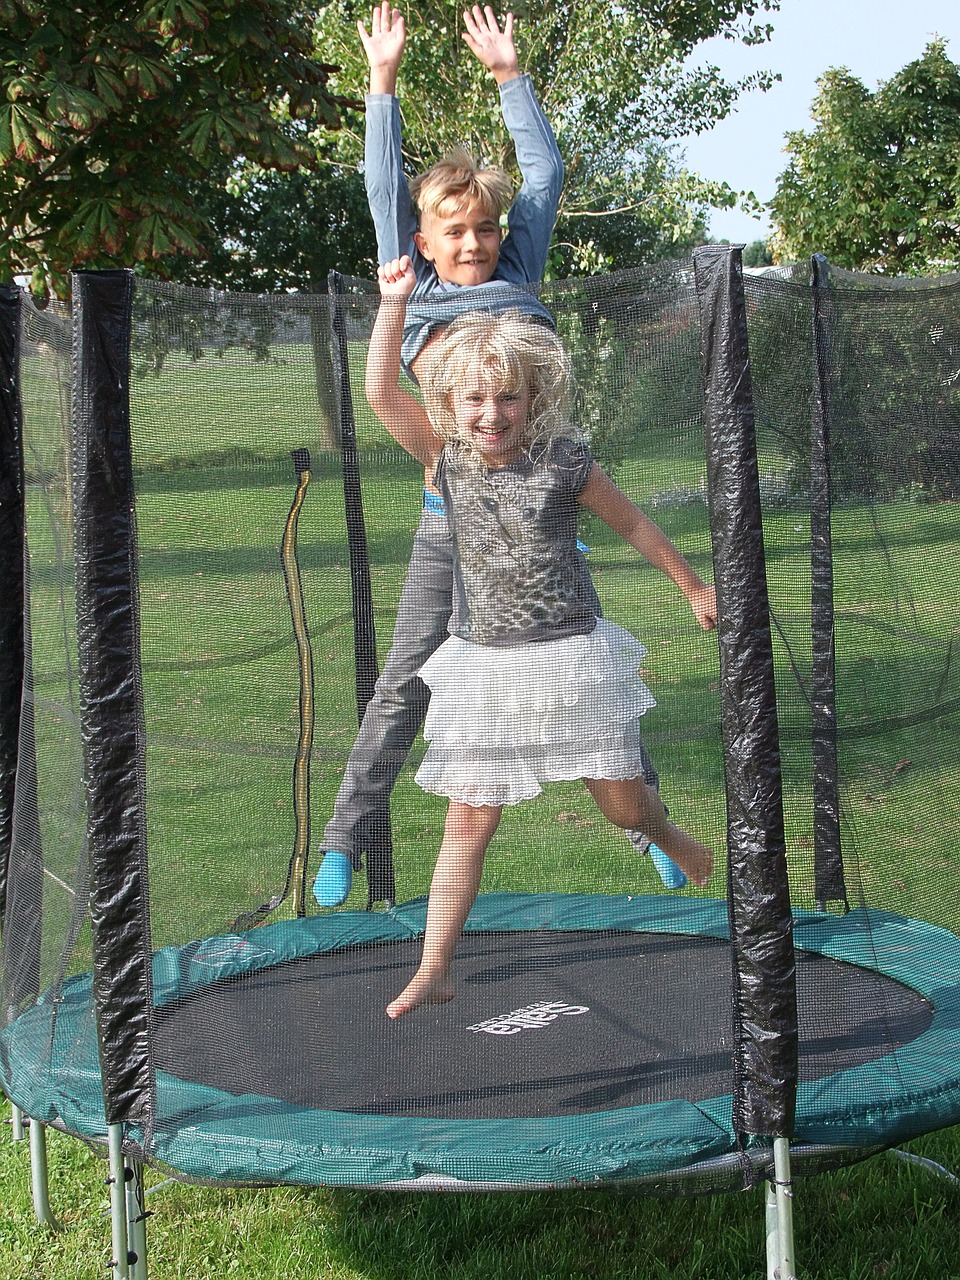 trampoline jump action free photo